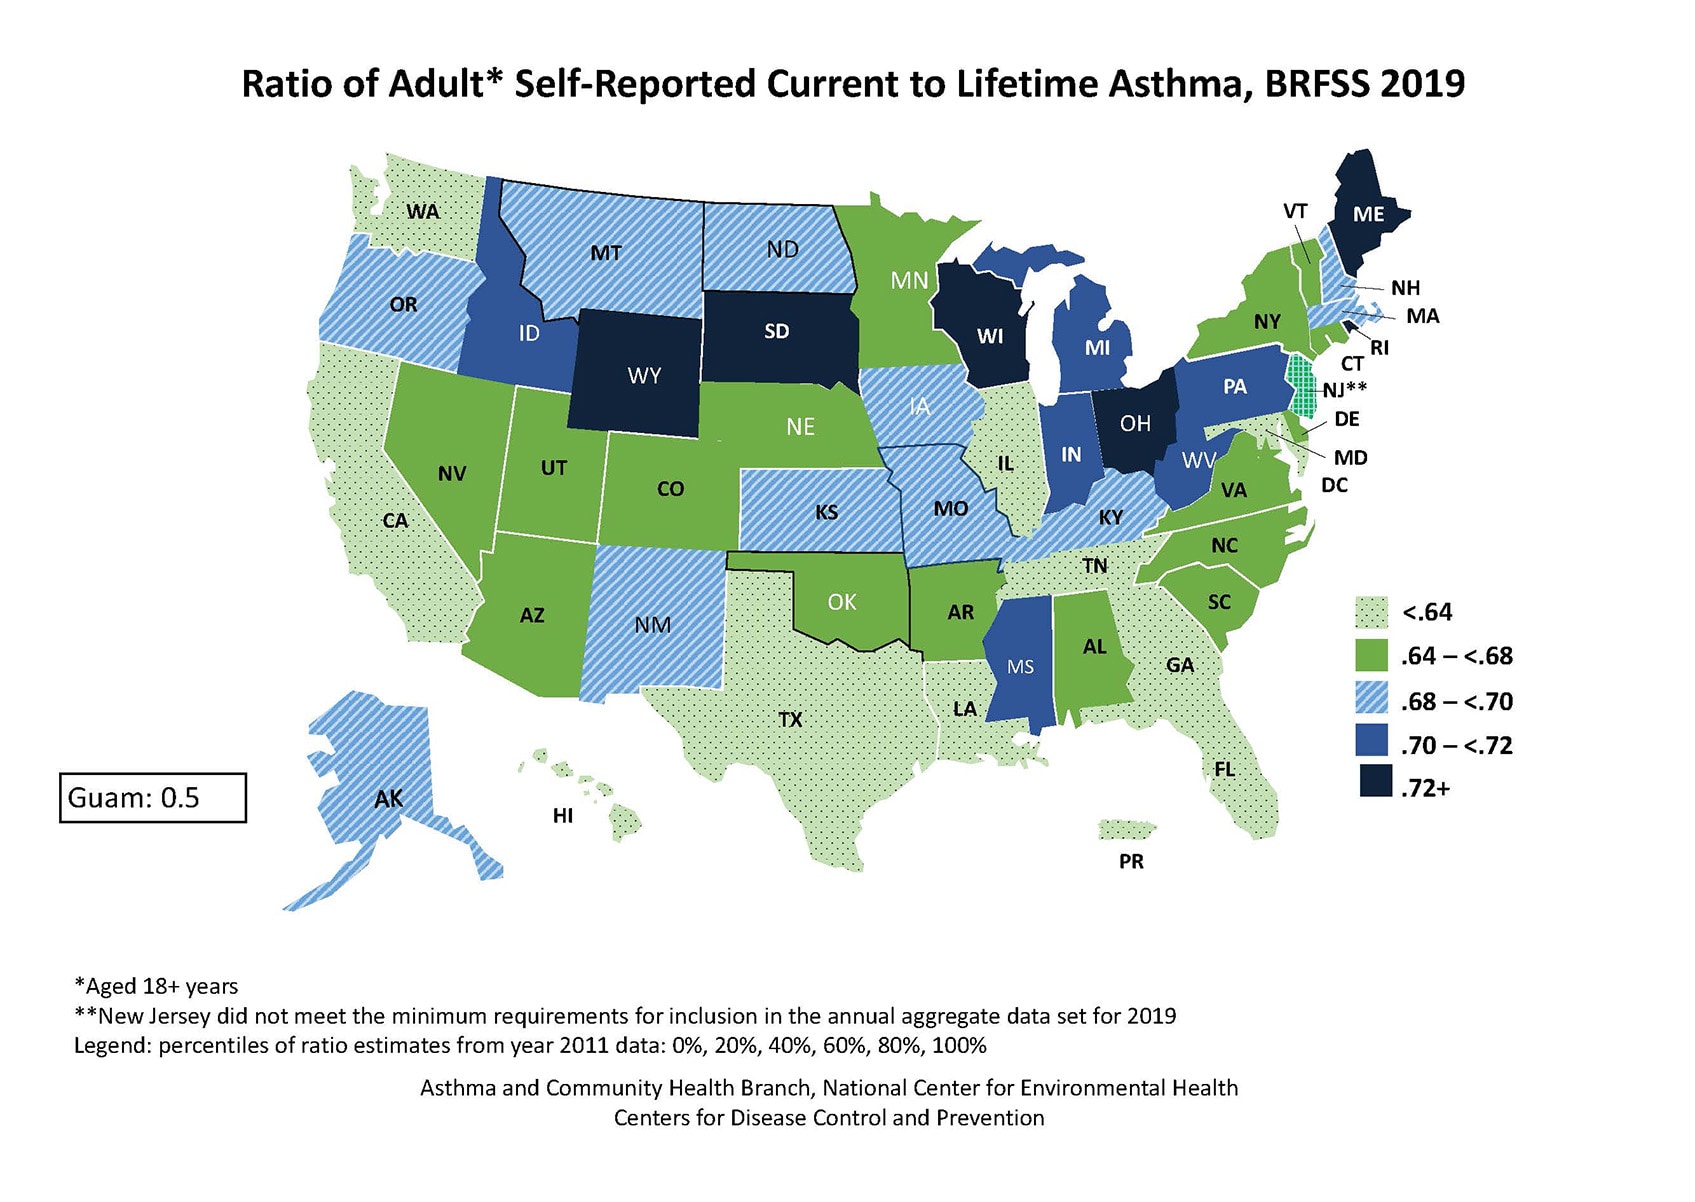 U.S. map showing ratio of adult self-reported current to lifetime asthma by state for BRFSS 2019